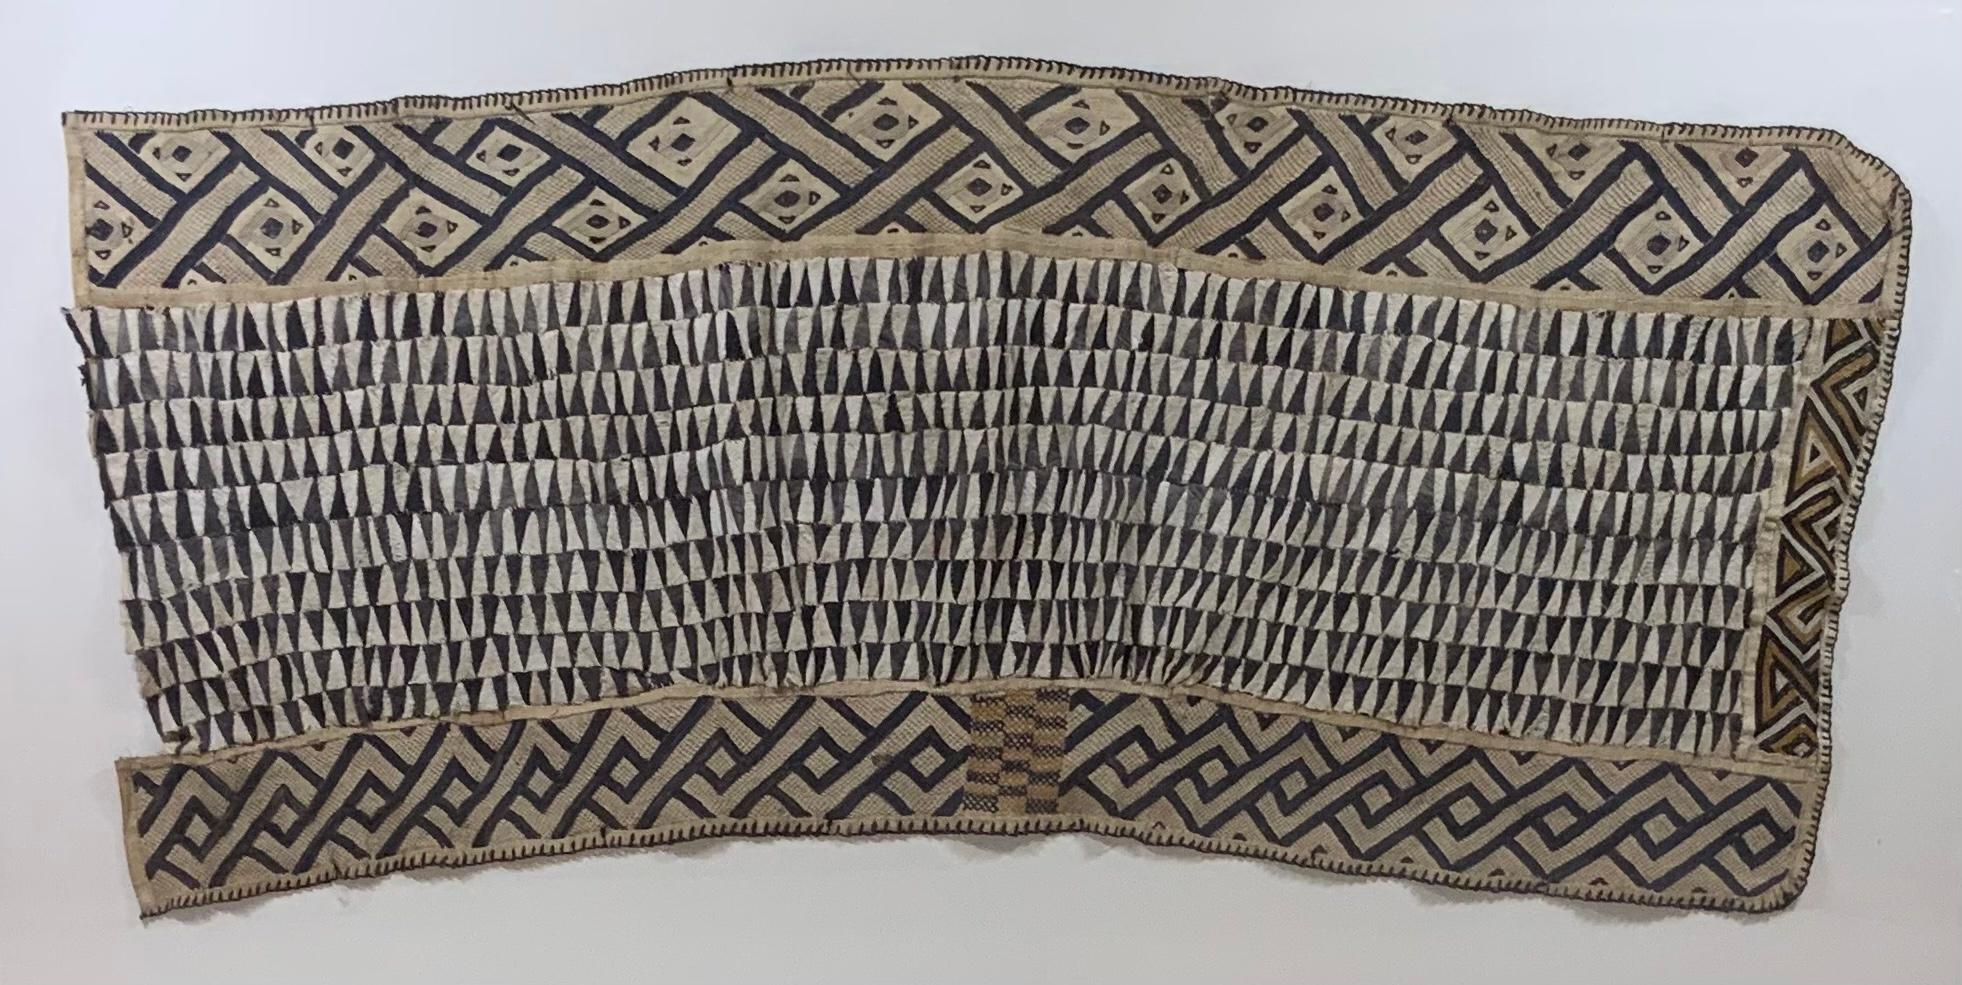 Professionally museum mounted exceptional antique African textile with brown small textile fragments woven into the geometric pattern in raffia and cotton patchwork , interlock border appliqué panel around three sides of the textile .
Great